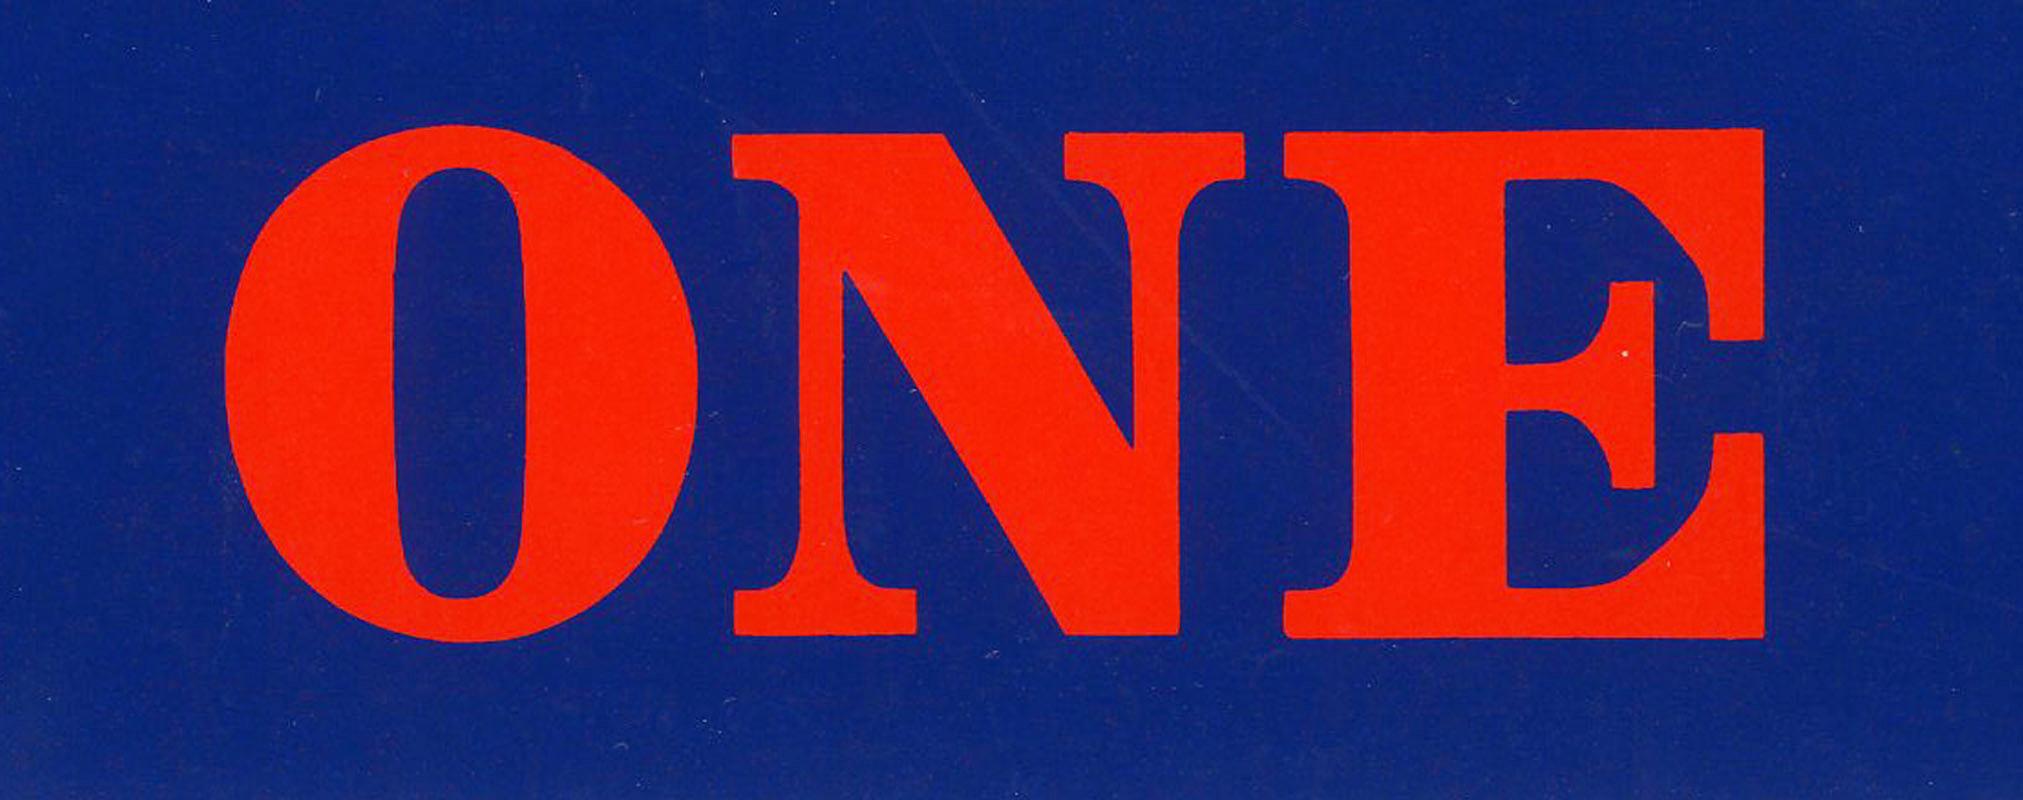 One - Contemporary Print by Robert Indiana